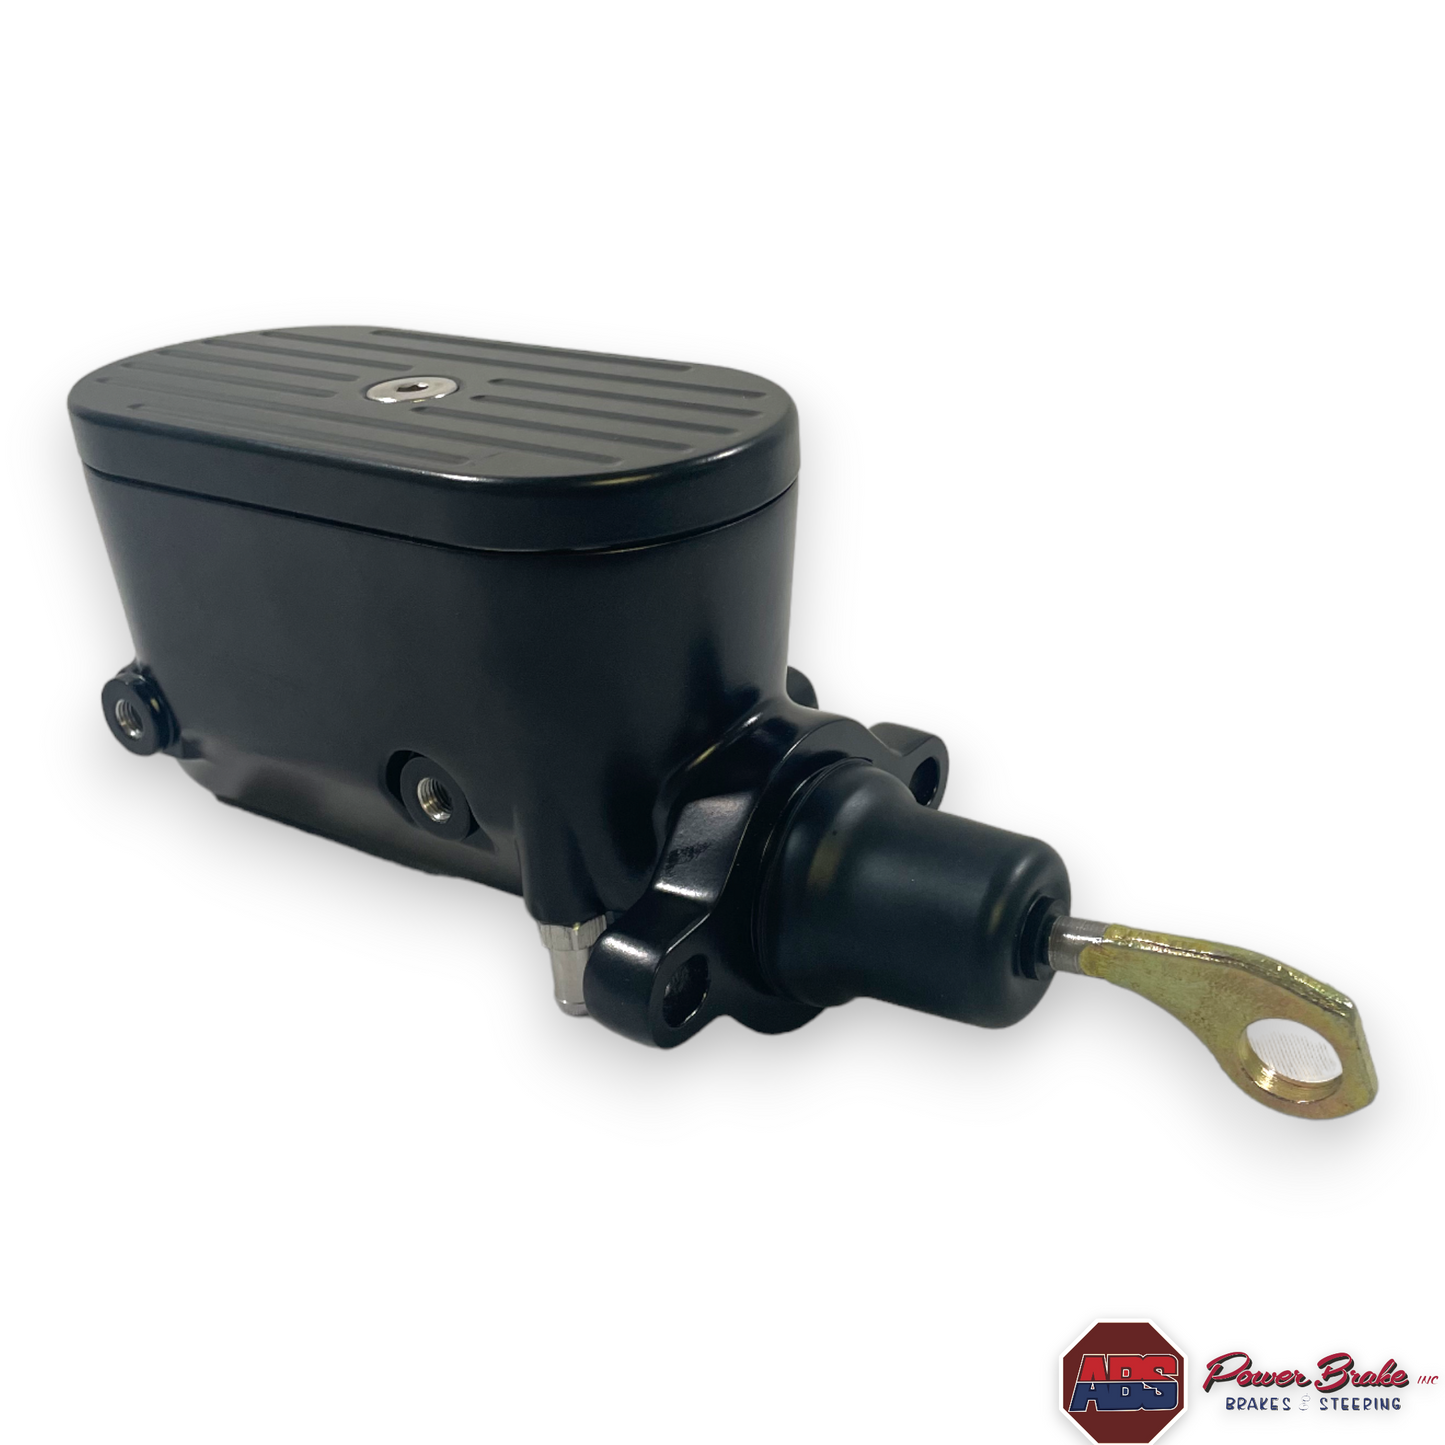 #10-66-BLK 1967-69 Ford Mustang Satin Black Compact Electric High Pressure Master Cylinder